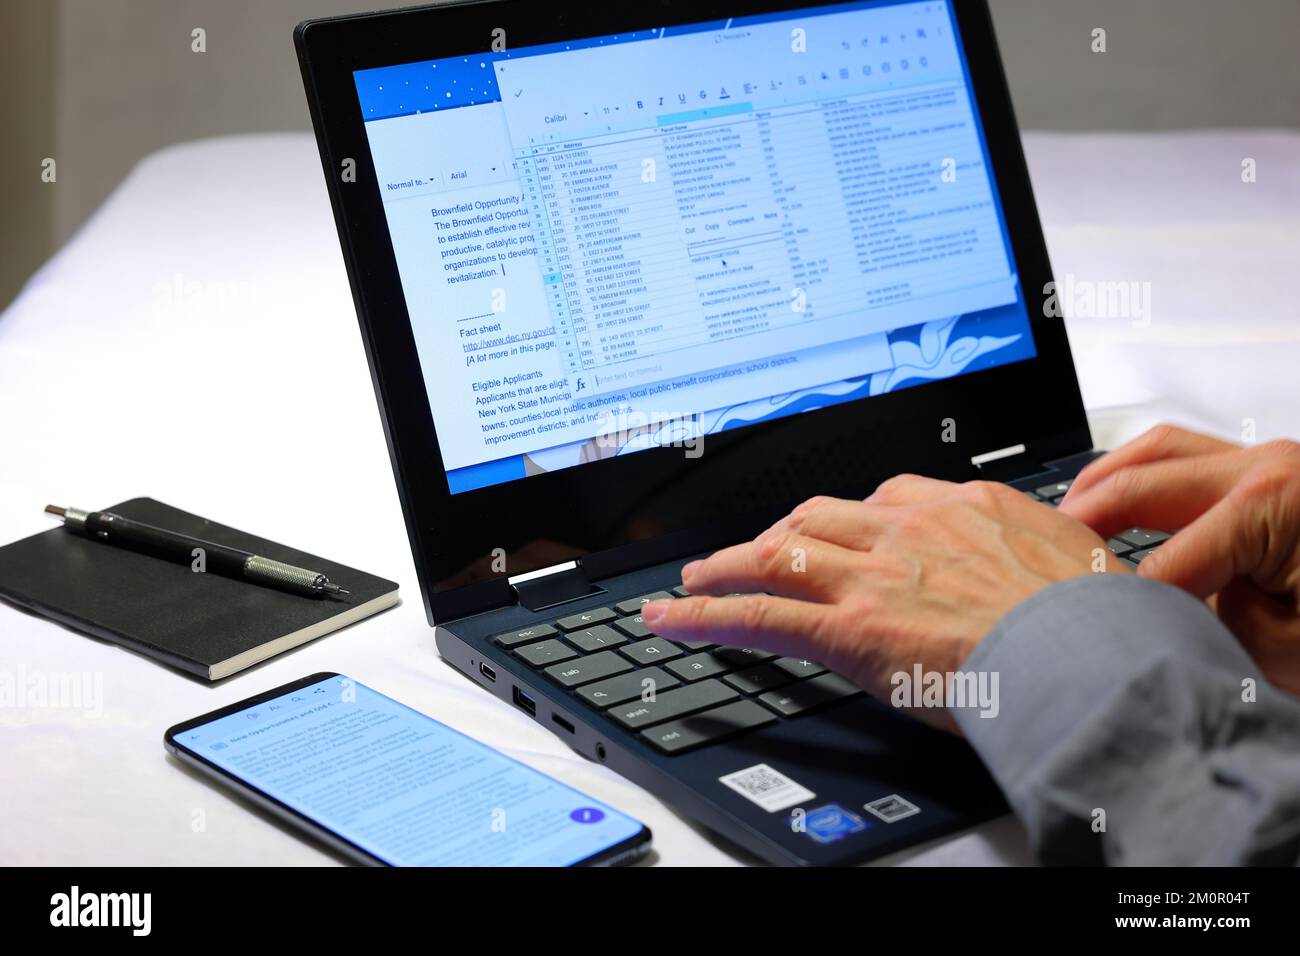 A closeup of a person's hands typing into a laptop computer with a notebook and smartphone nearby. Stock Photo